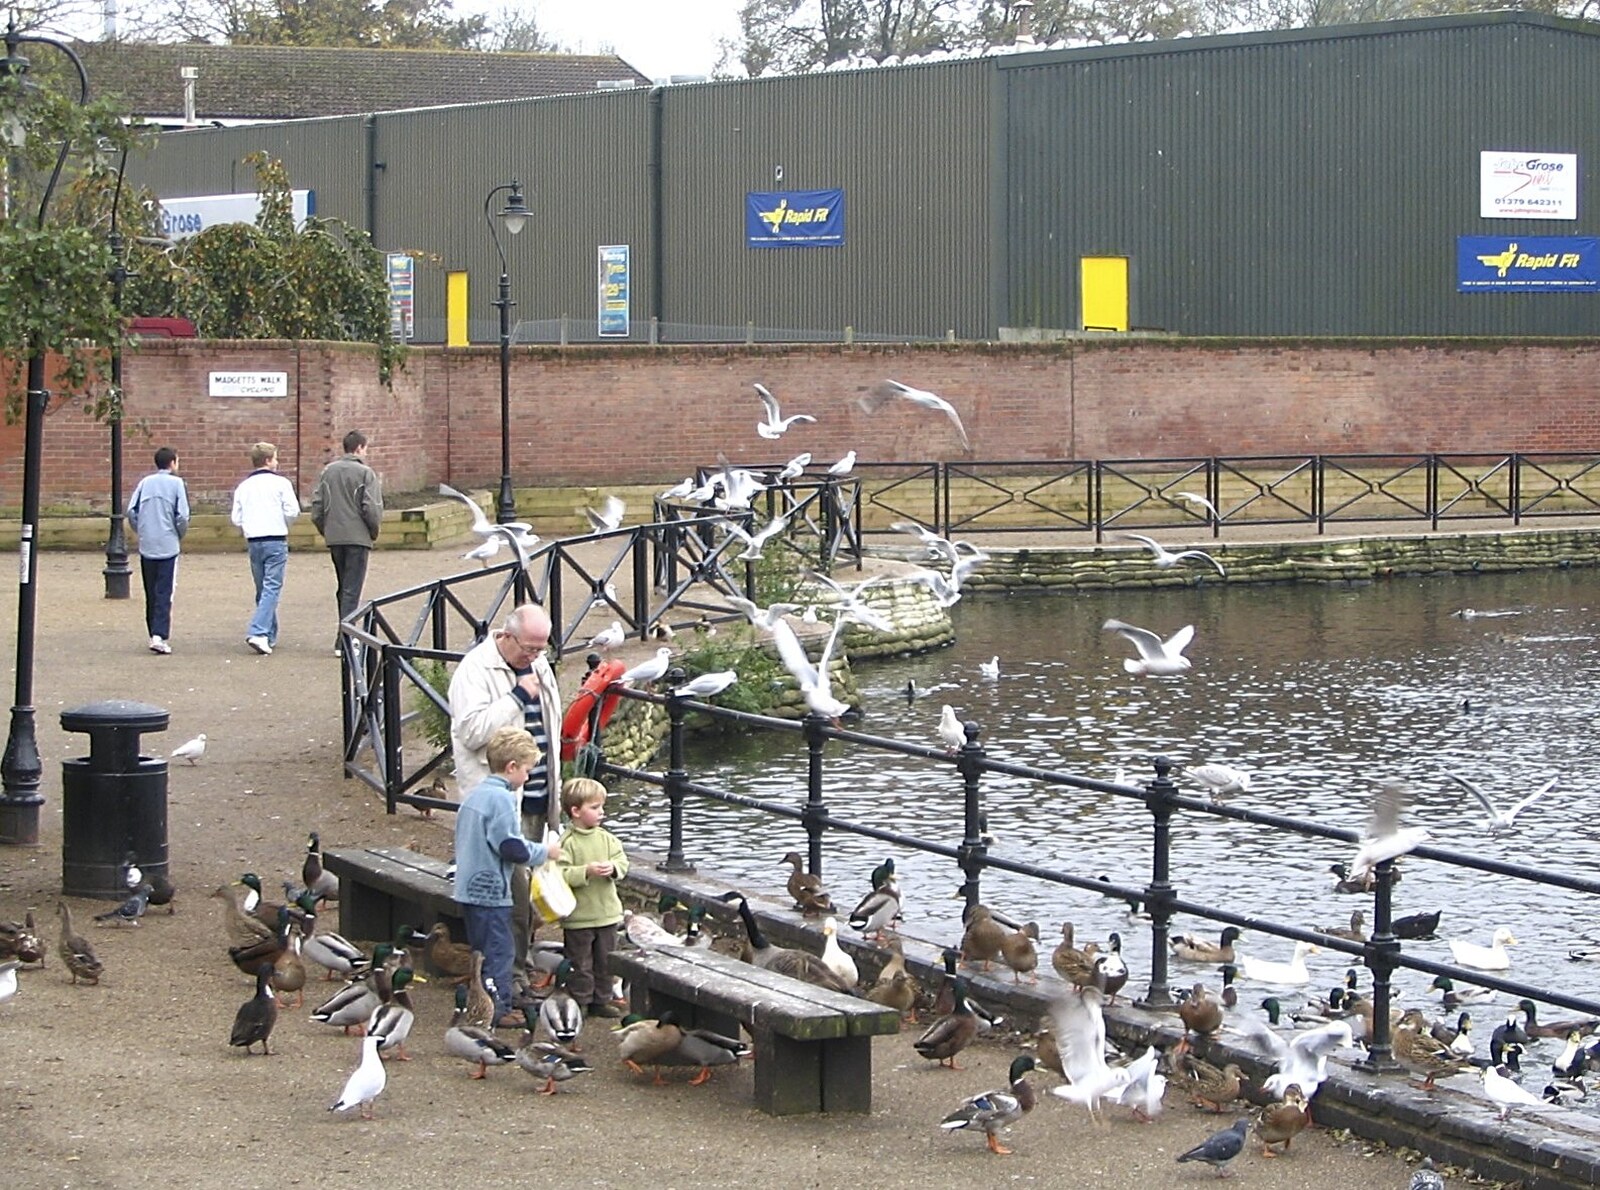 Seagulls fly about from Feeding the Ducks: a Diss and Norwich Miscellany - 7th November 2004